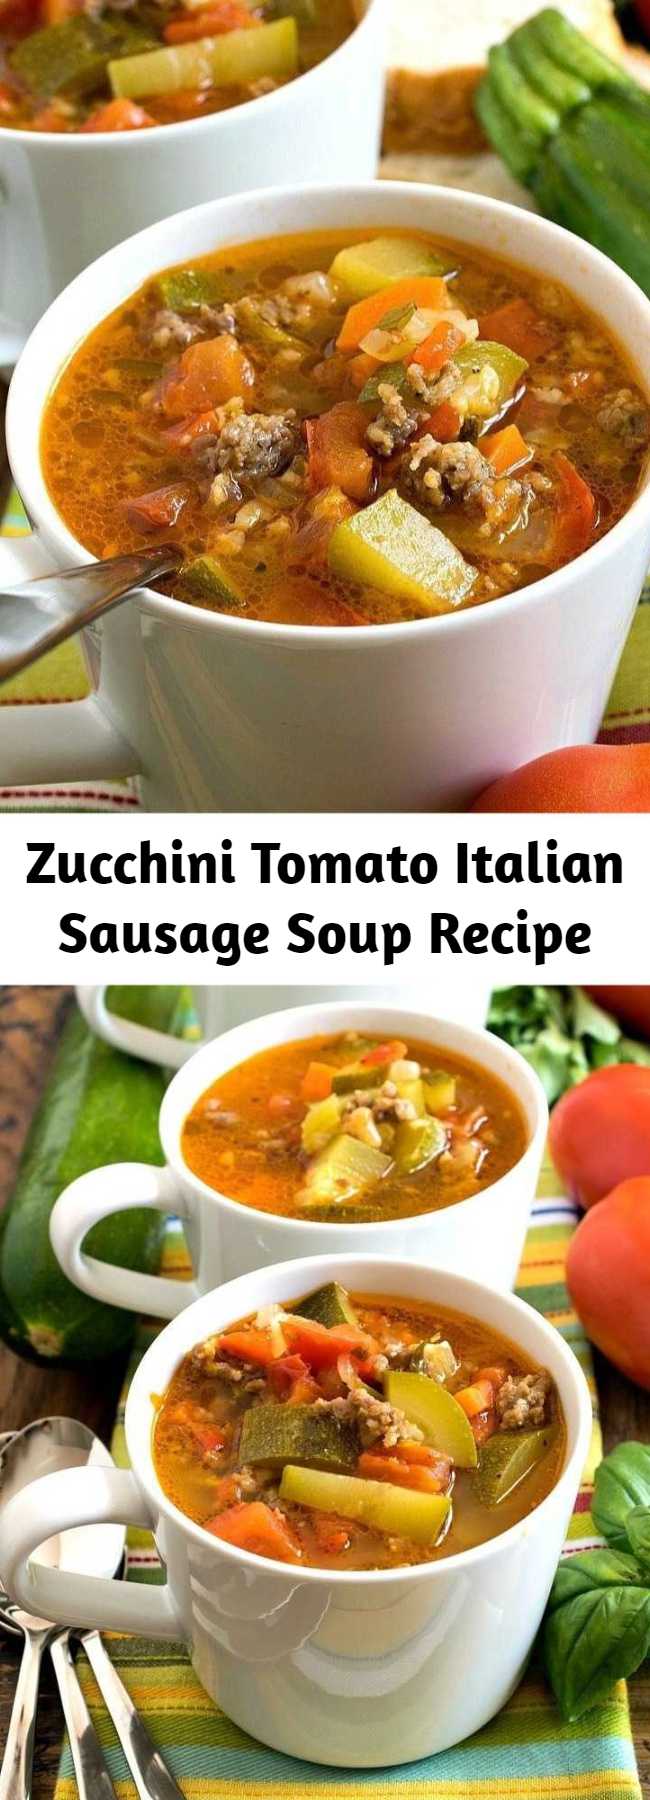 Zucchini Tomato Italian Sausage Soup Recipe - A zesty, super flavorful soup made with fresh zucchini and tomatoes. Sweet Italian sausage adds more great flavor too! #soup #zucchini #tomatoes #Italiansausage